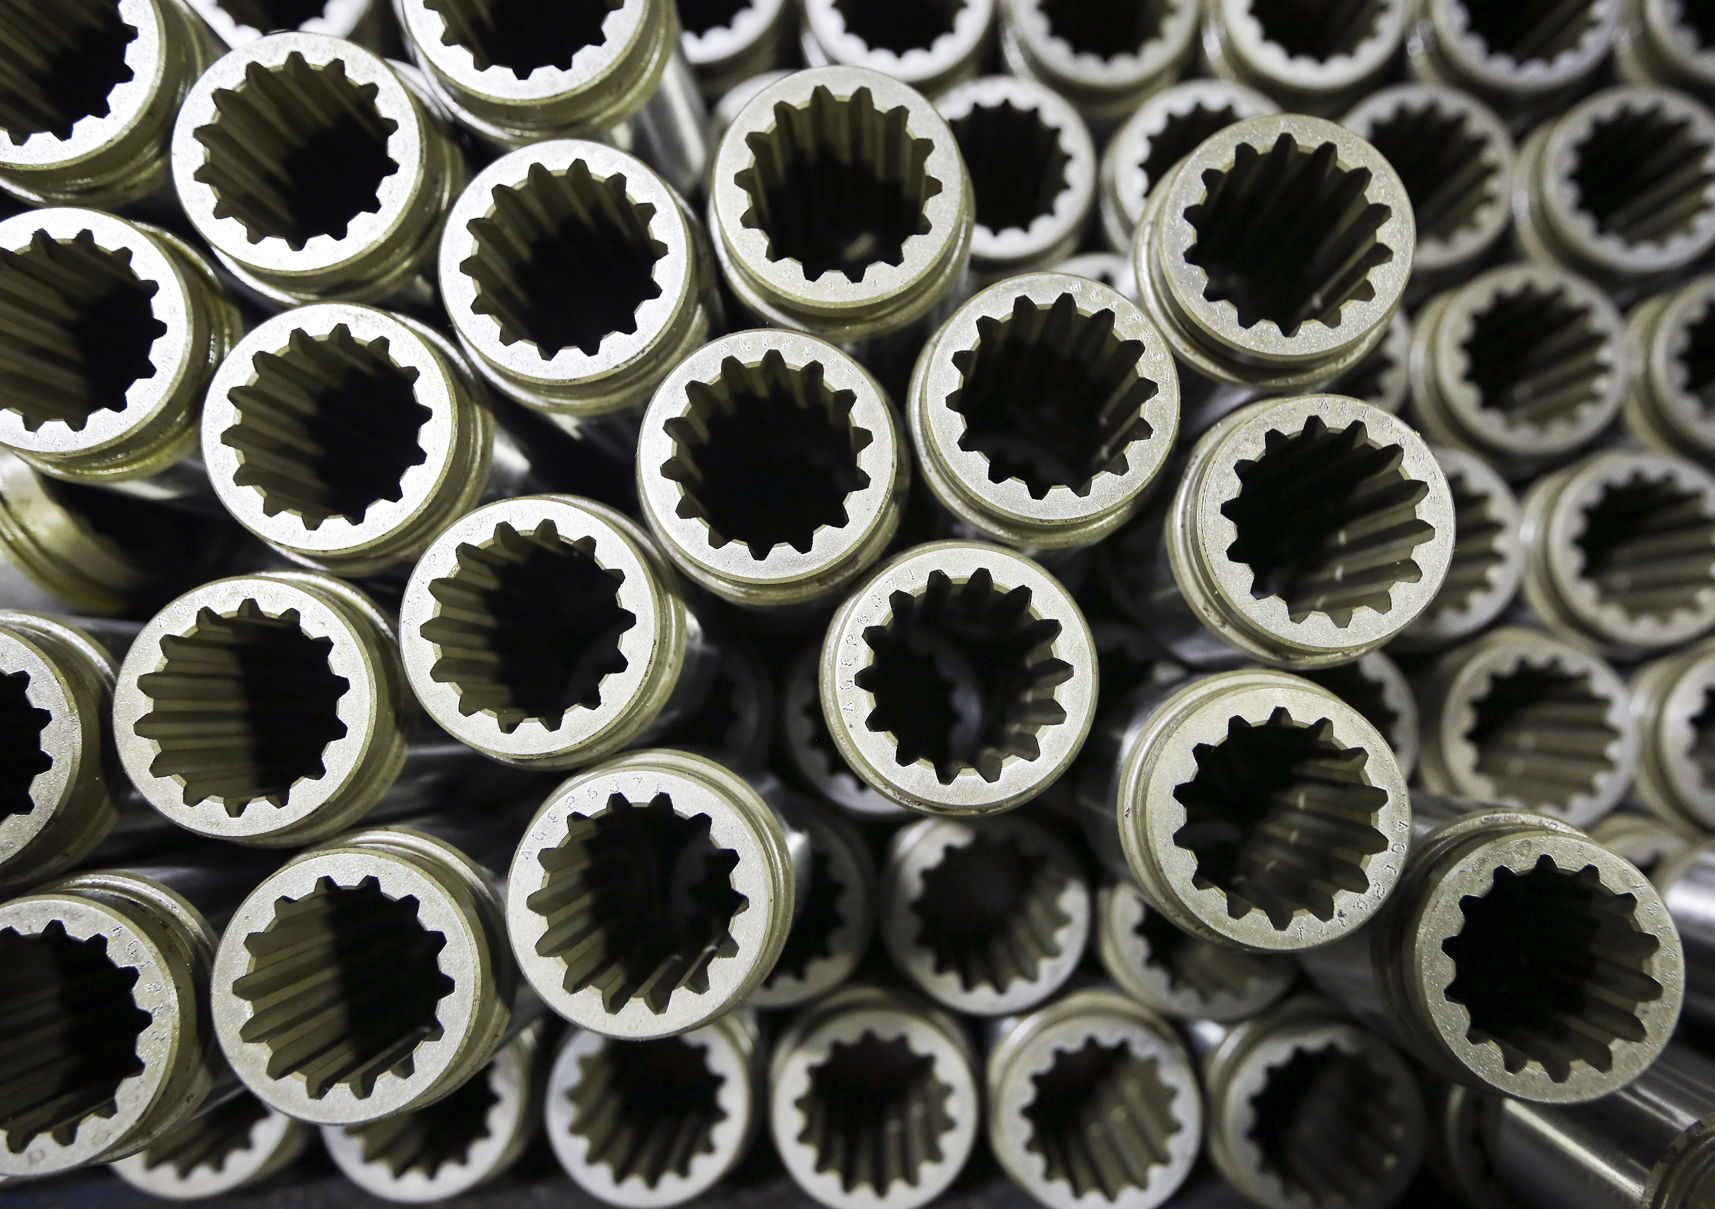 Internal splines manufactured at The Adams Company in Dubuque.    PHOTO CREDIT: Nicki Kohl
Telegraph Herald